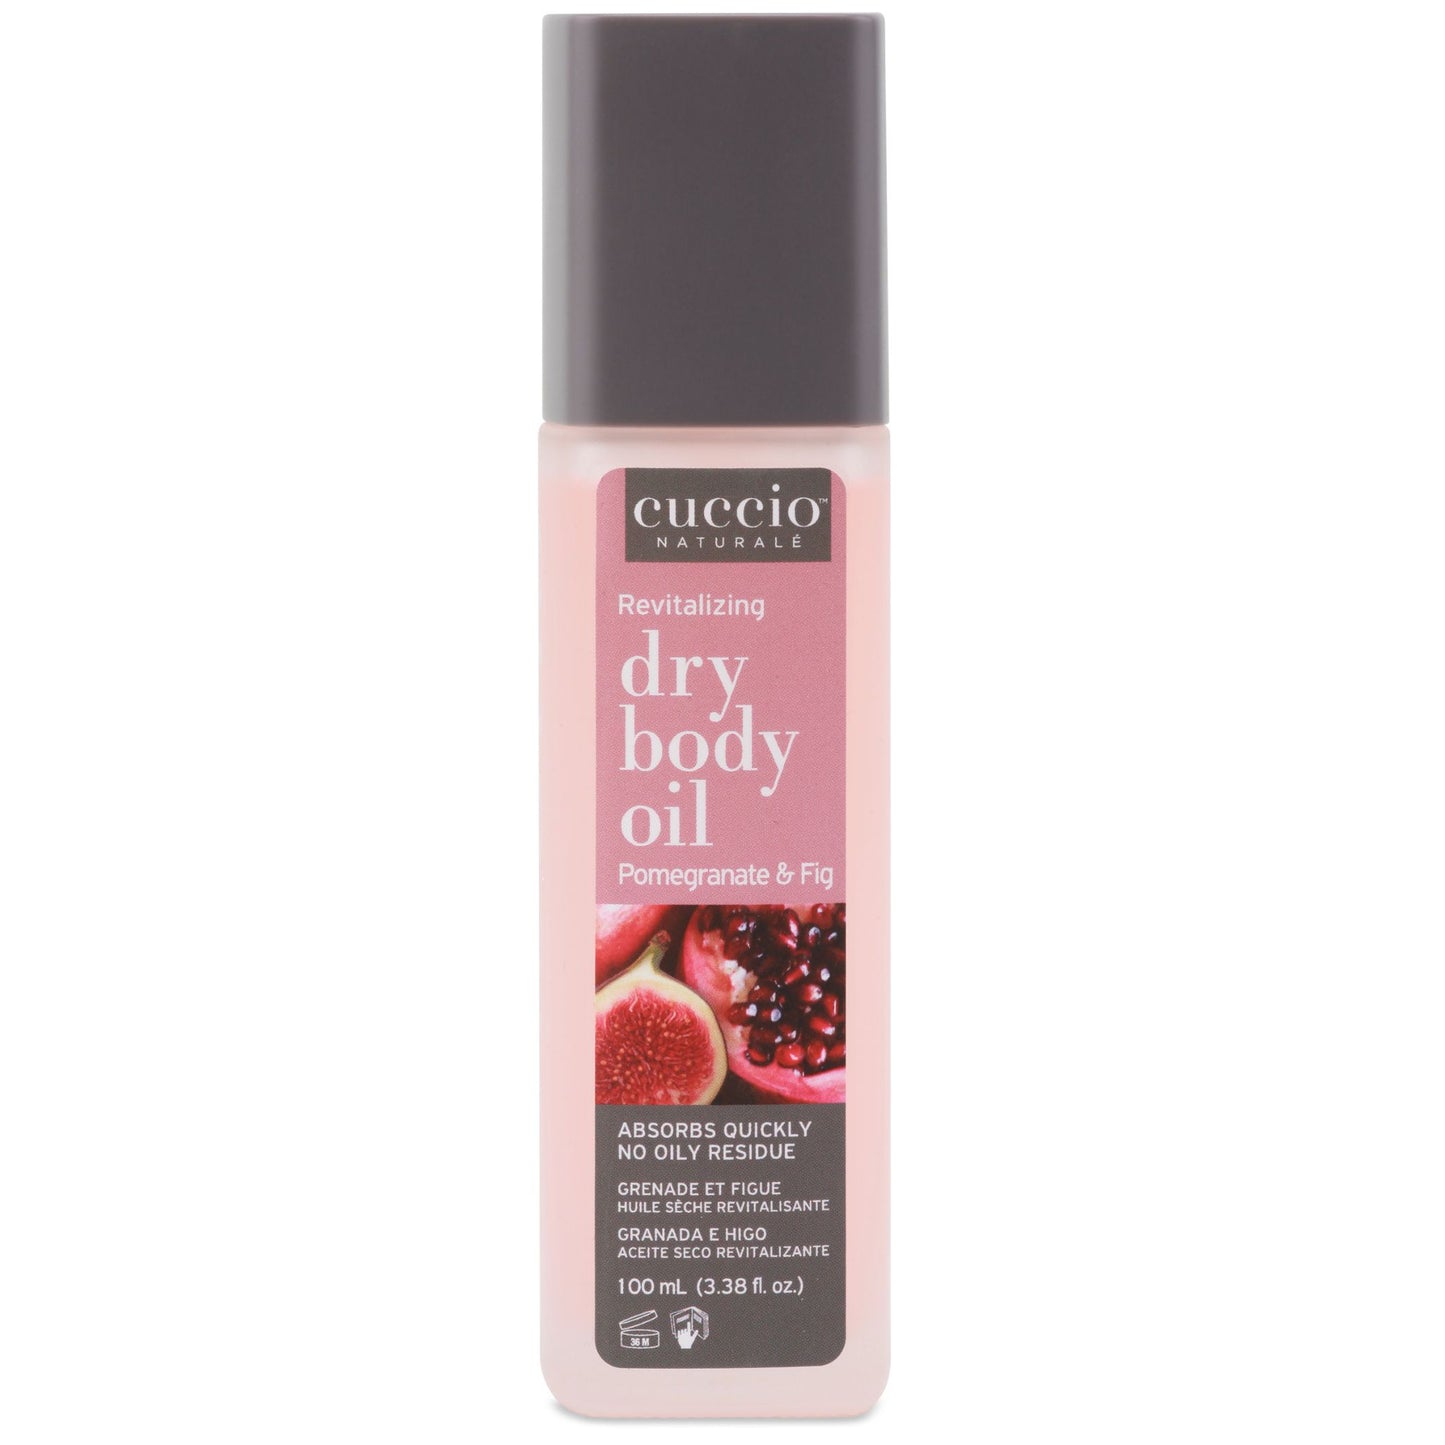 Purchase one (2.5 oz.) cuticle oil and get the same scent Dry Body Oil (3.38 fl. oz.) FREE! -Pomegranate & Fig BUNDLE